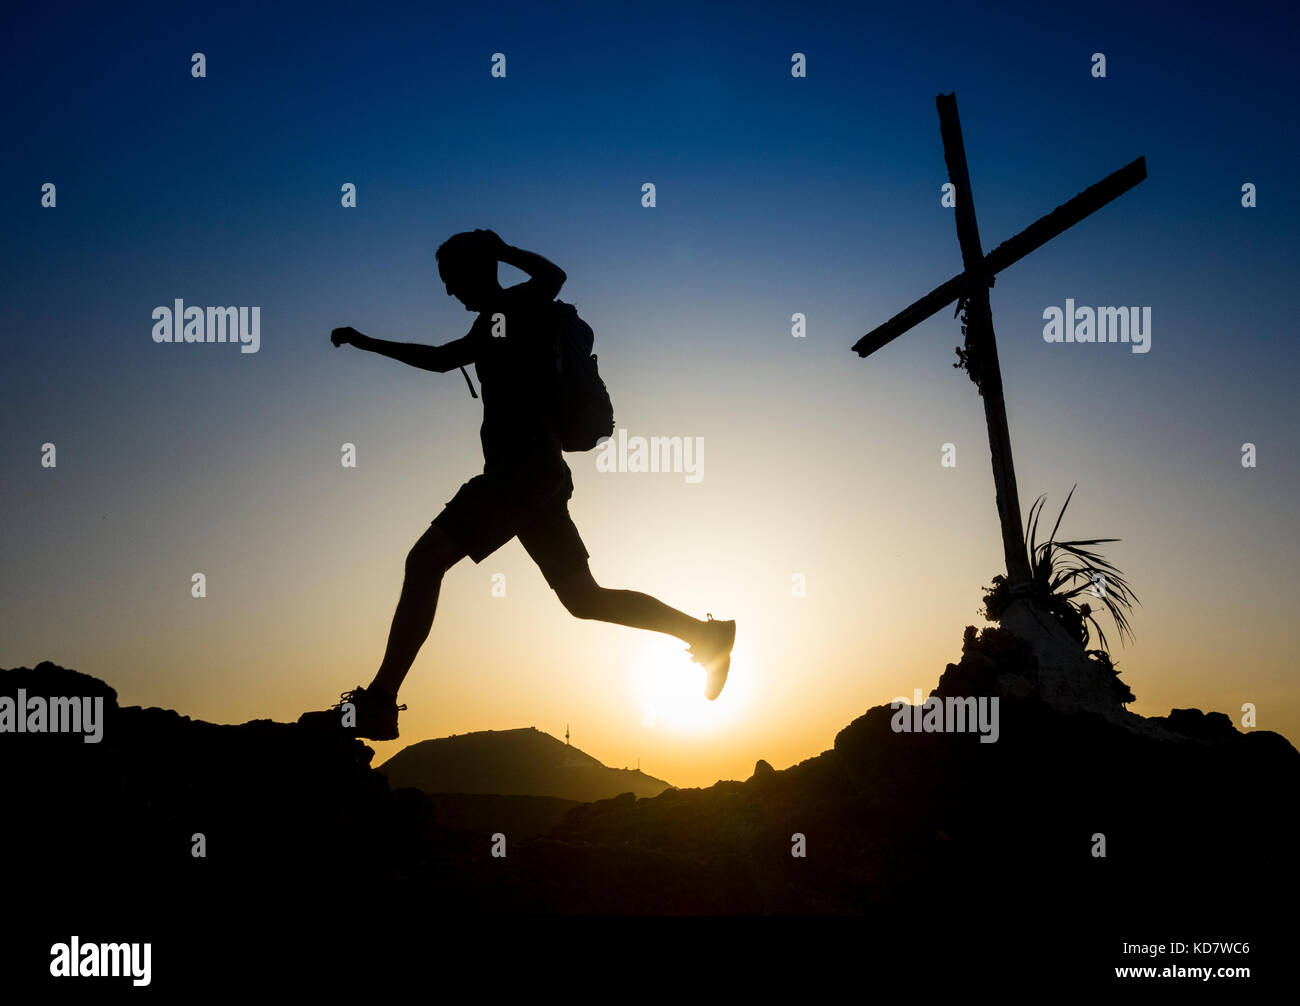 Las Palmas, Gran Canaria, Canary Islands, Spain. 11th October, 2017. Weather: A trail runner on mountain summit at sunrise on a glorious Wednedsay morning on Gran Canaria, with the temperature a balmy 25 degrees Celcius at 8am. Credit: ALAN DAWSON/Alamy Live News Stock Photo